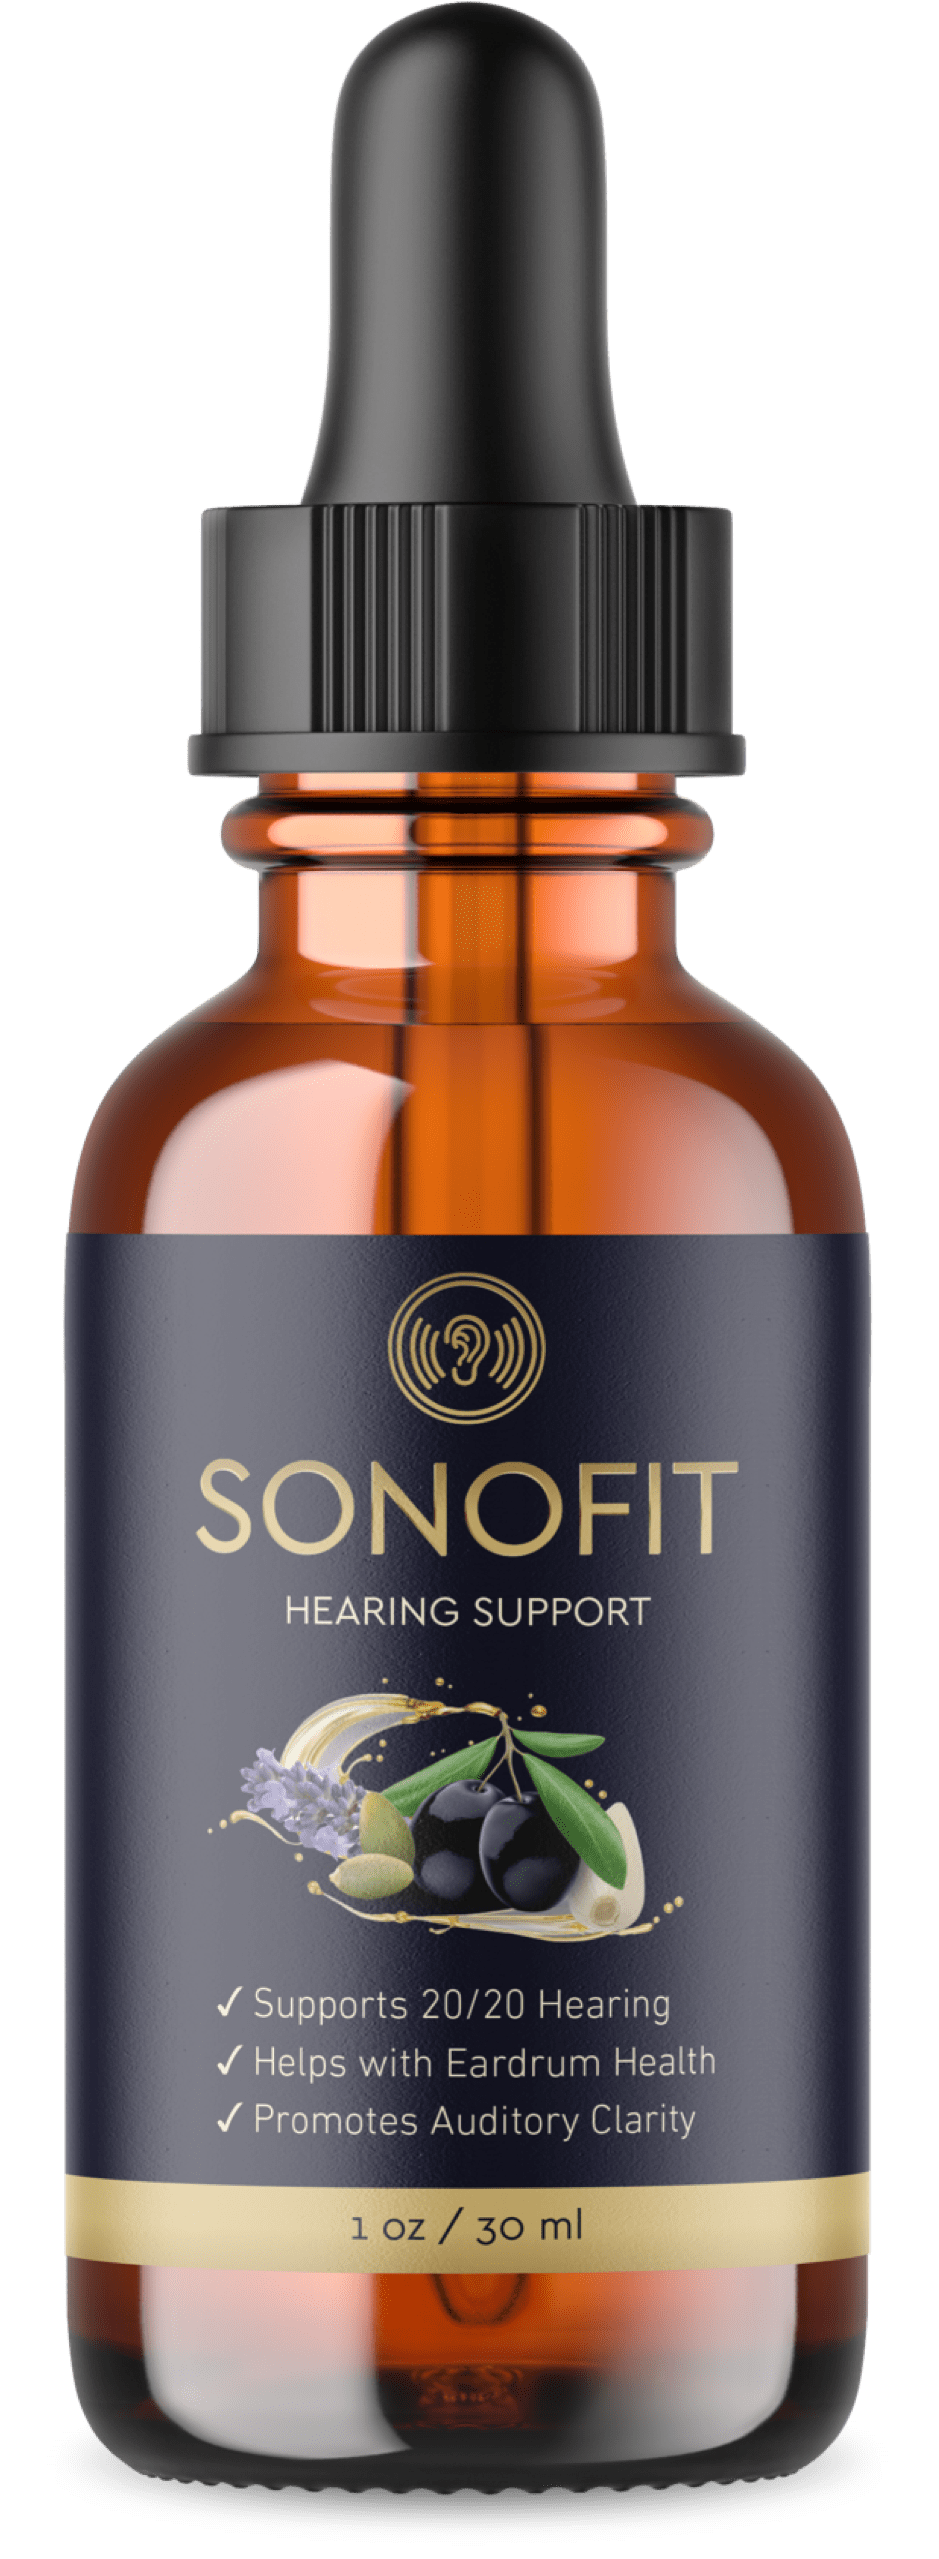 Get fit today with Sonofit - order now!